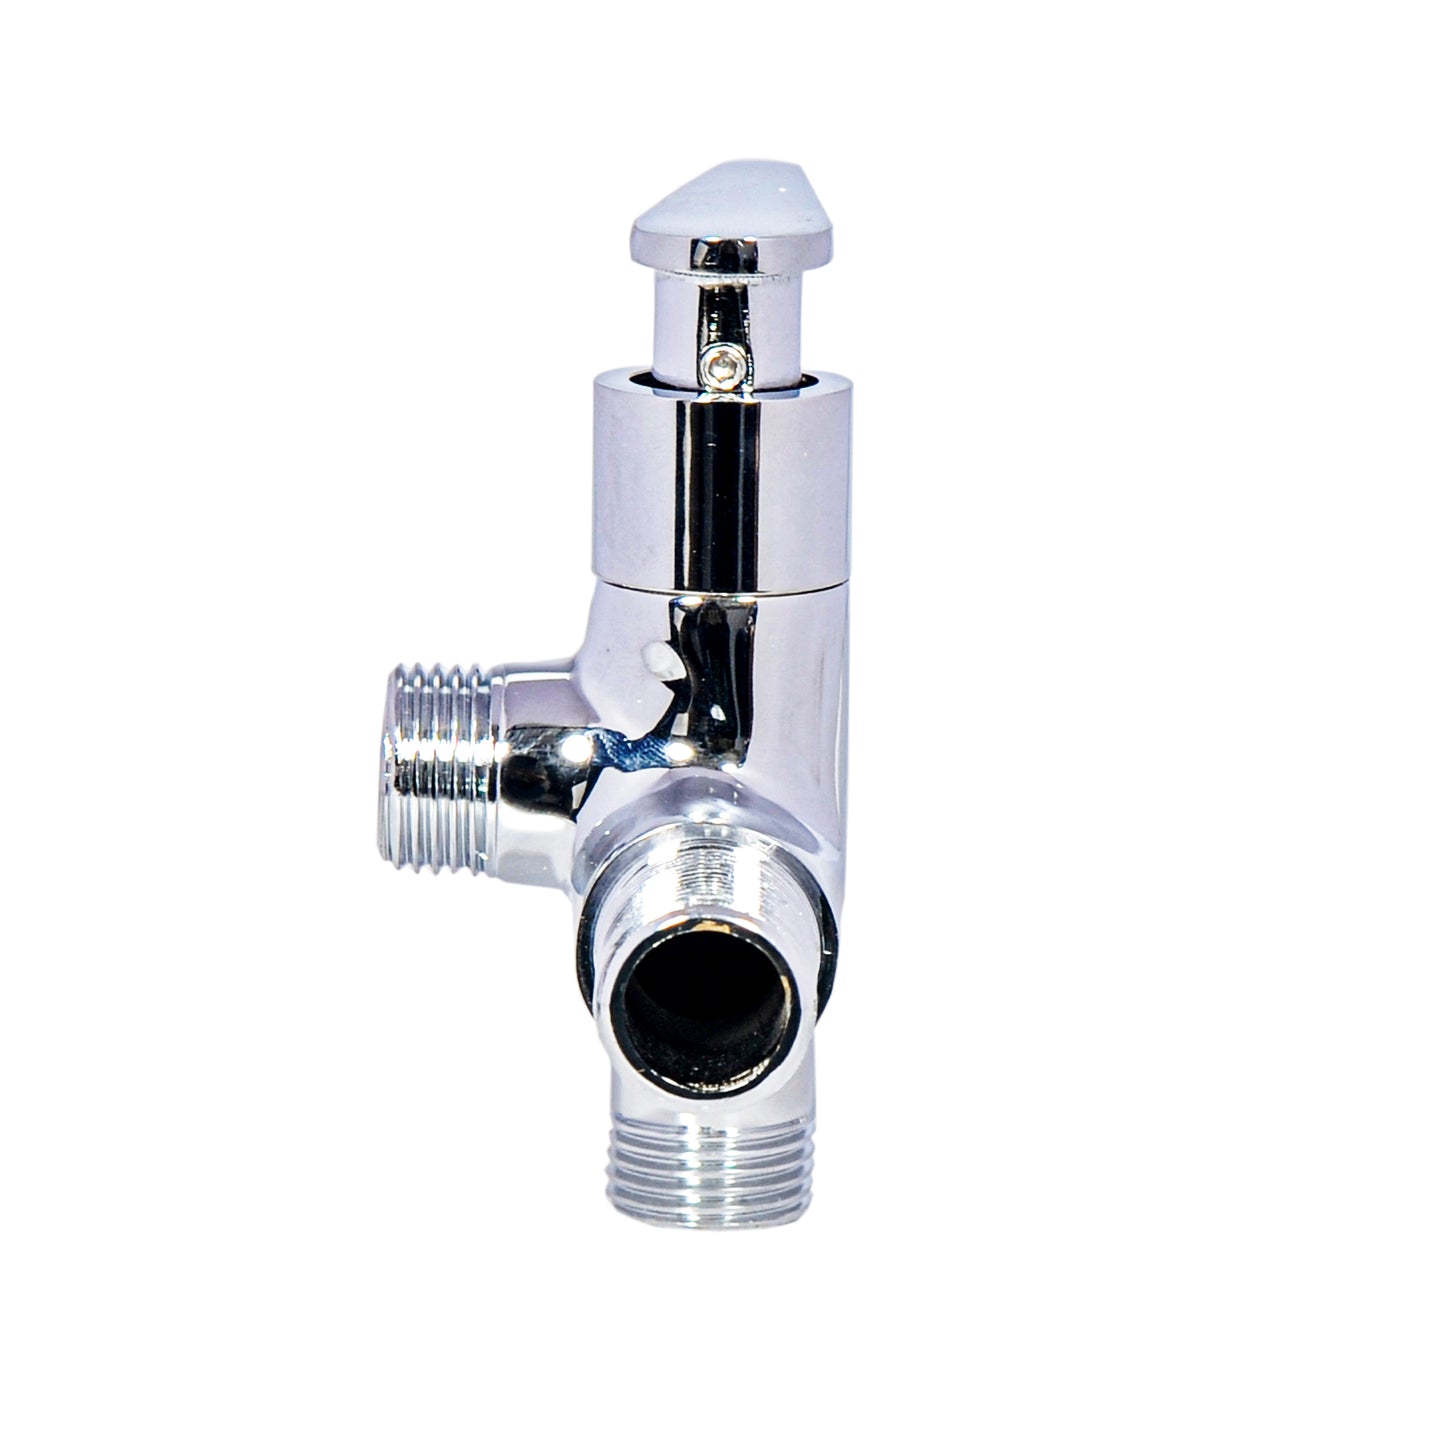 AC2-01 2 in 1 Angle Cock tap Valve for Bathroom Kitchen washbasin tap faucets with Wall Flange